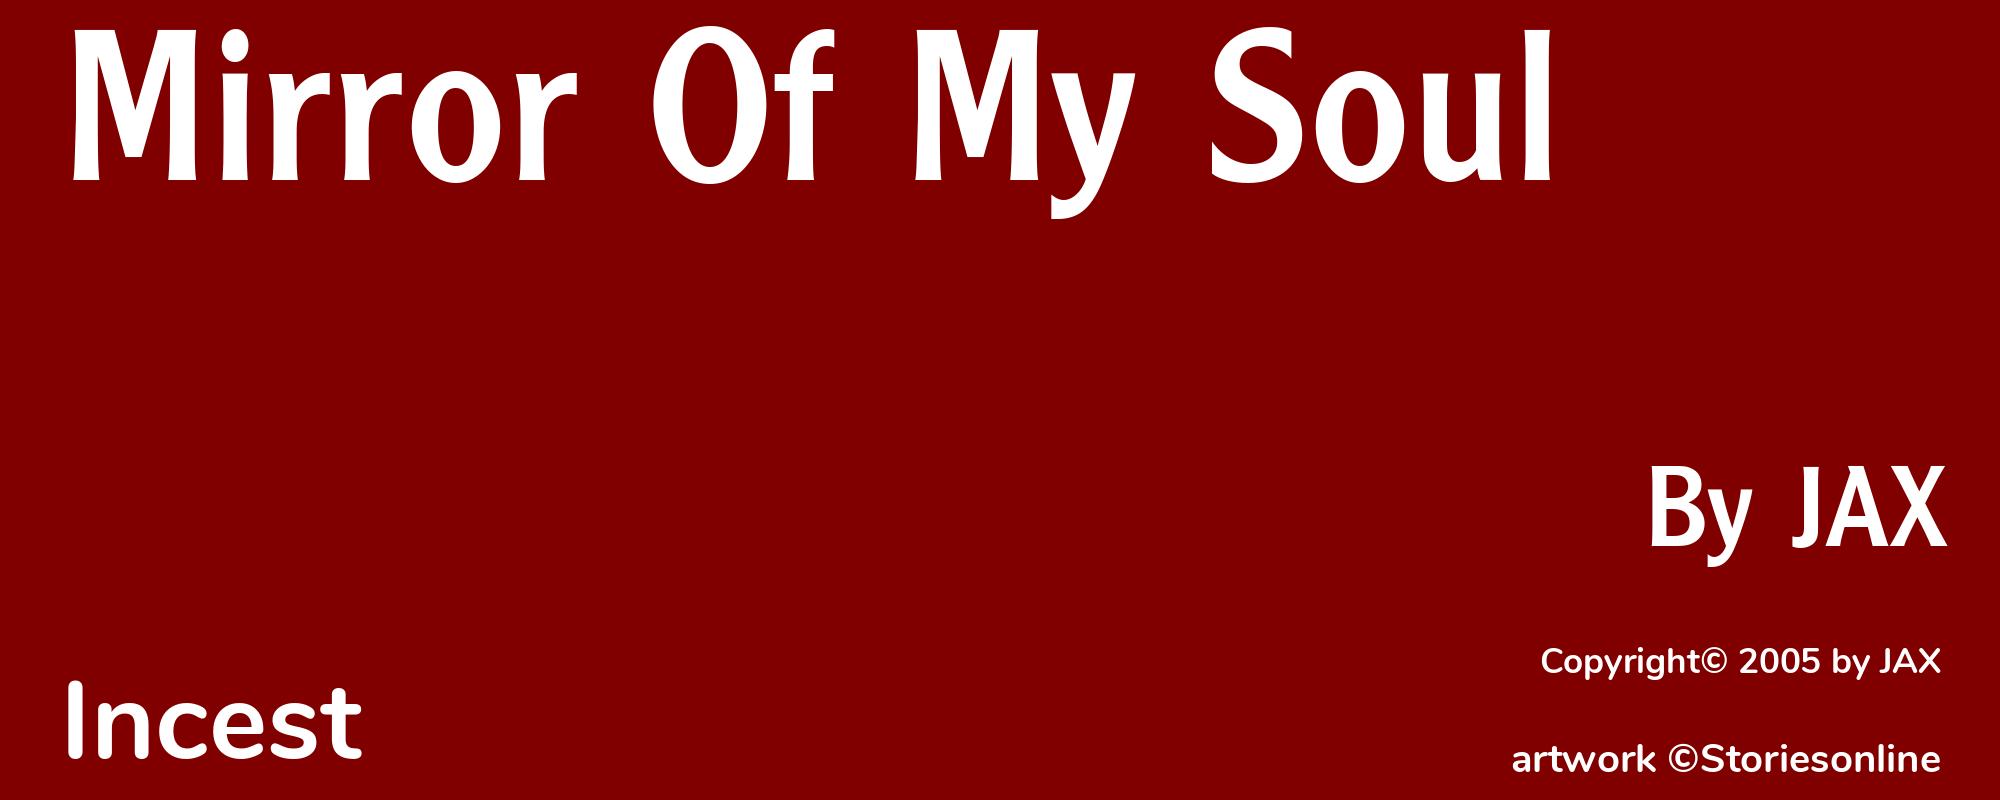 Mirror Of My Soul - Cover